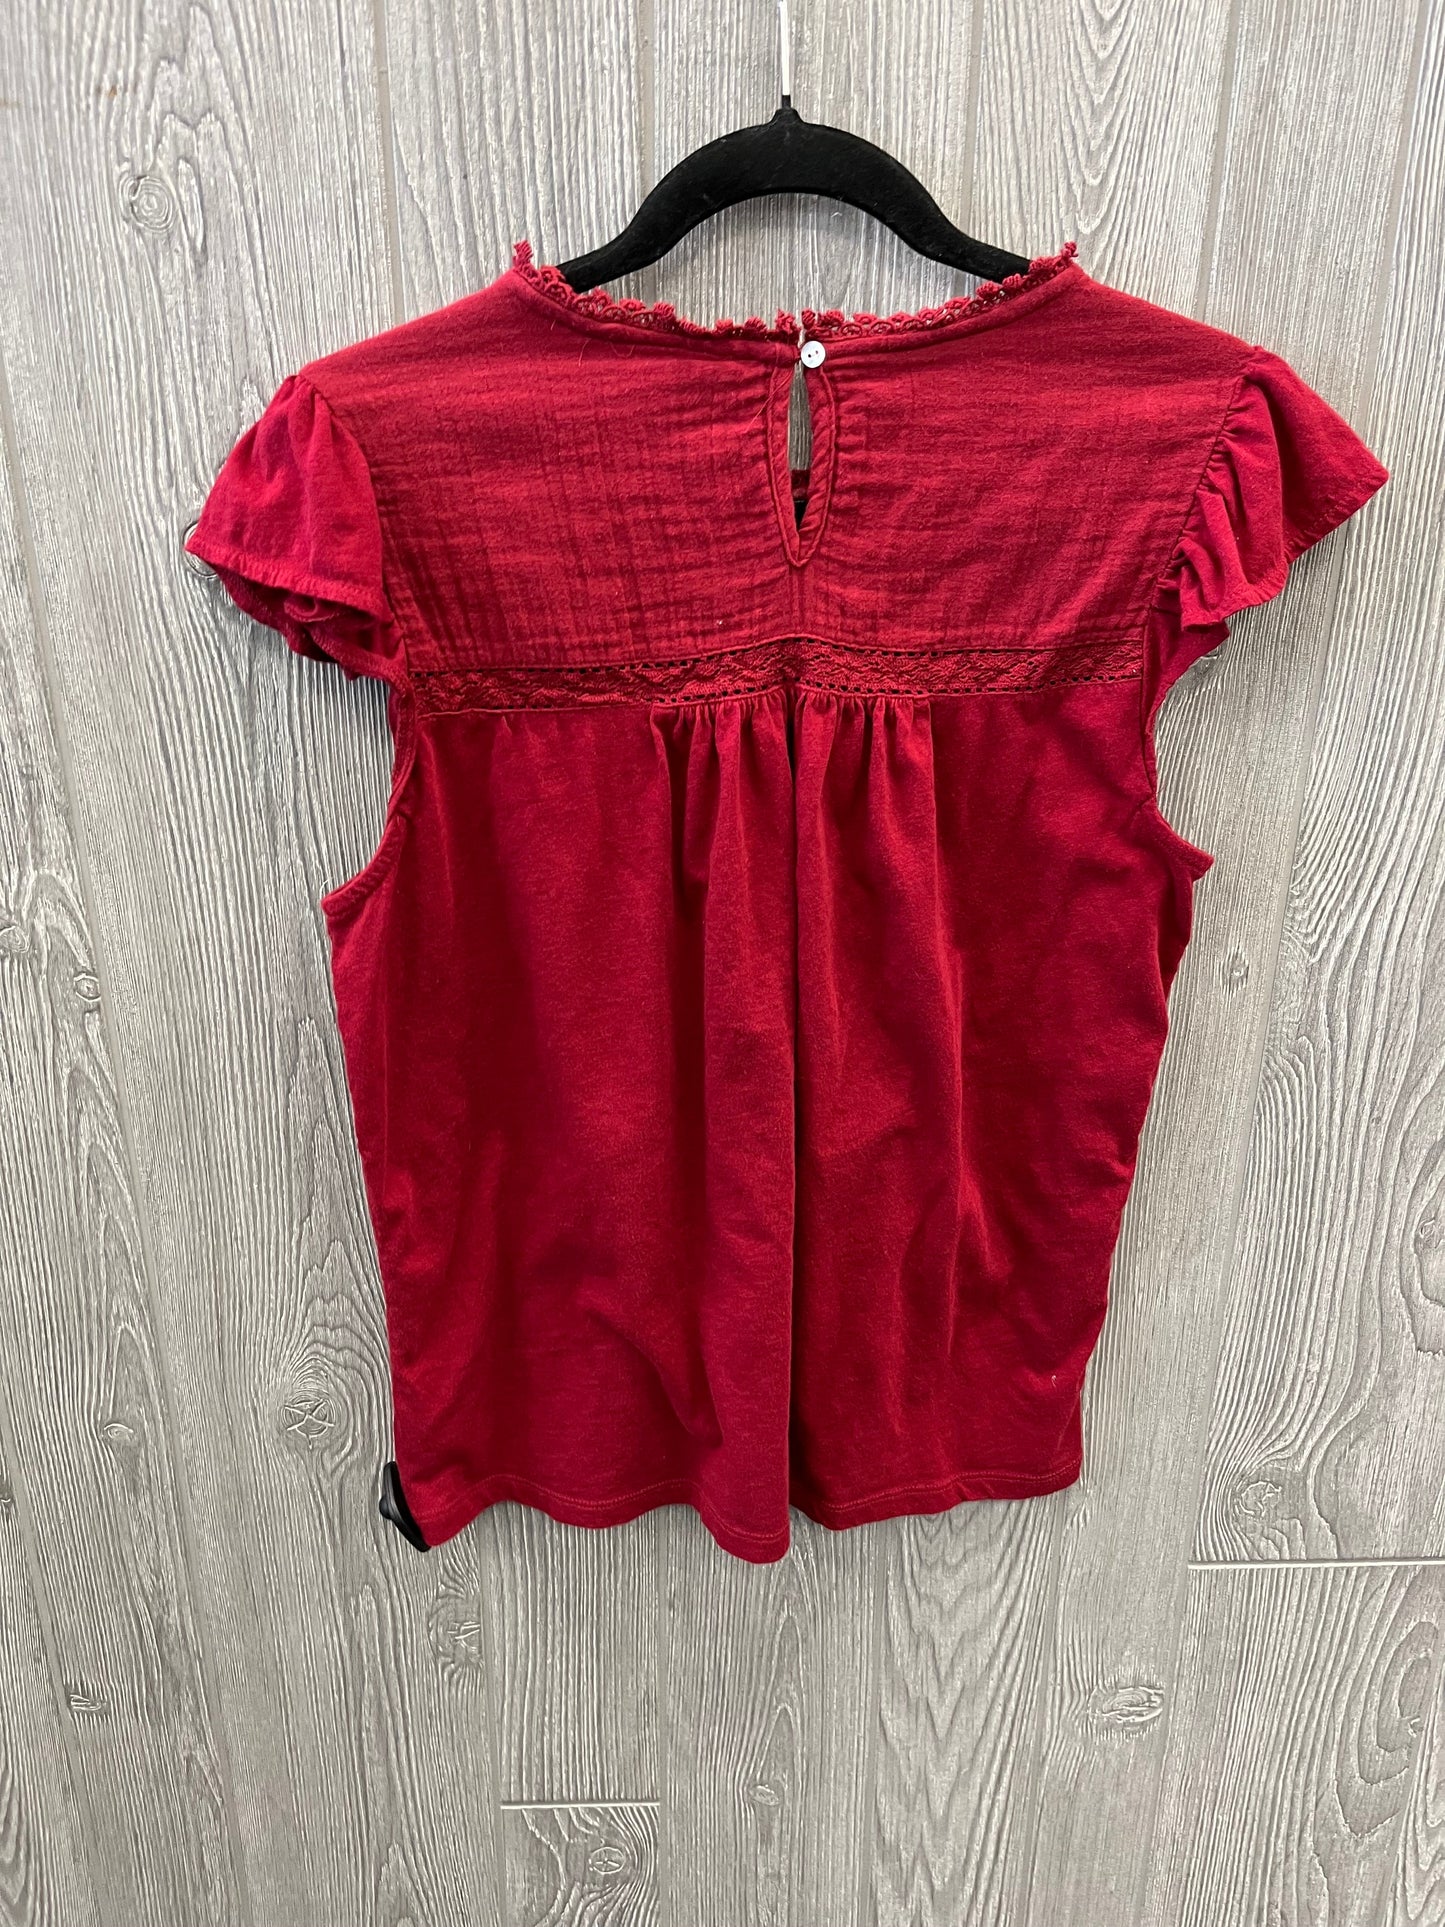 Red Top Sleeveless Lucky Brand, Size M